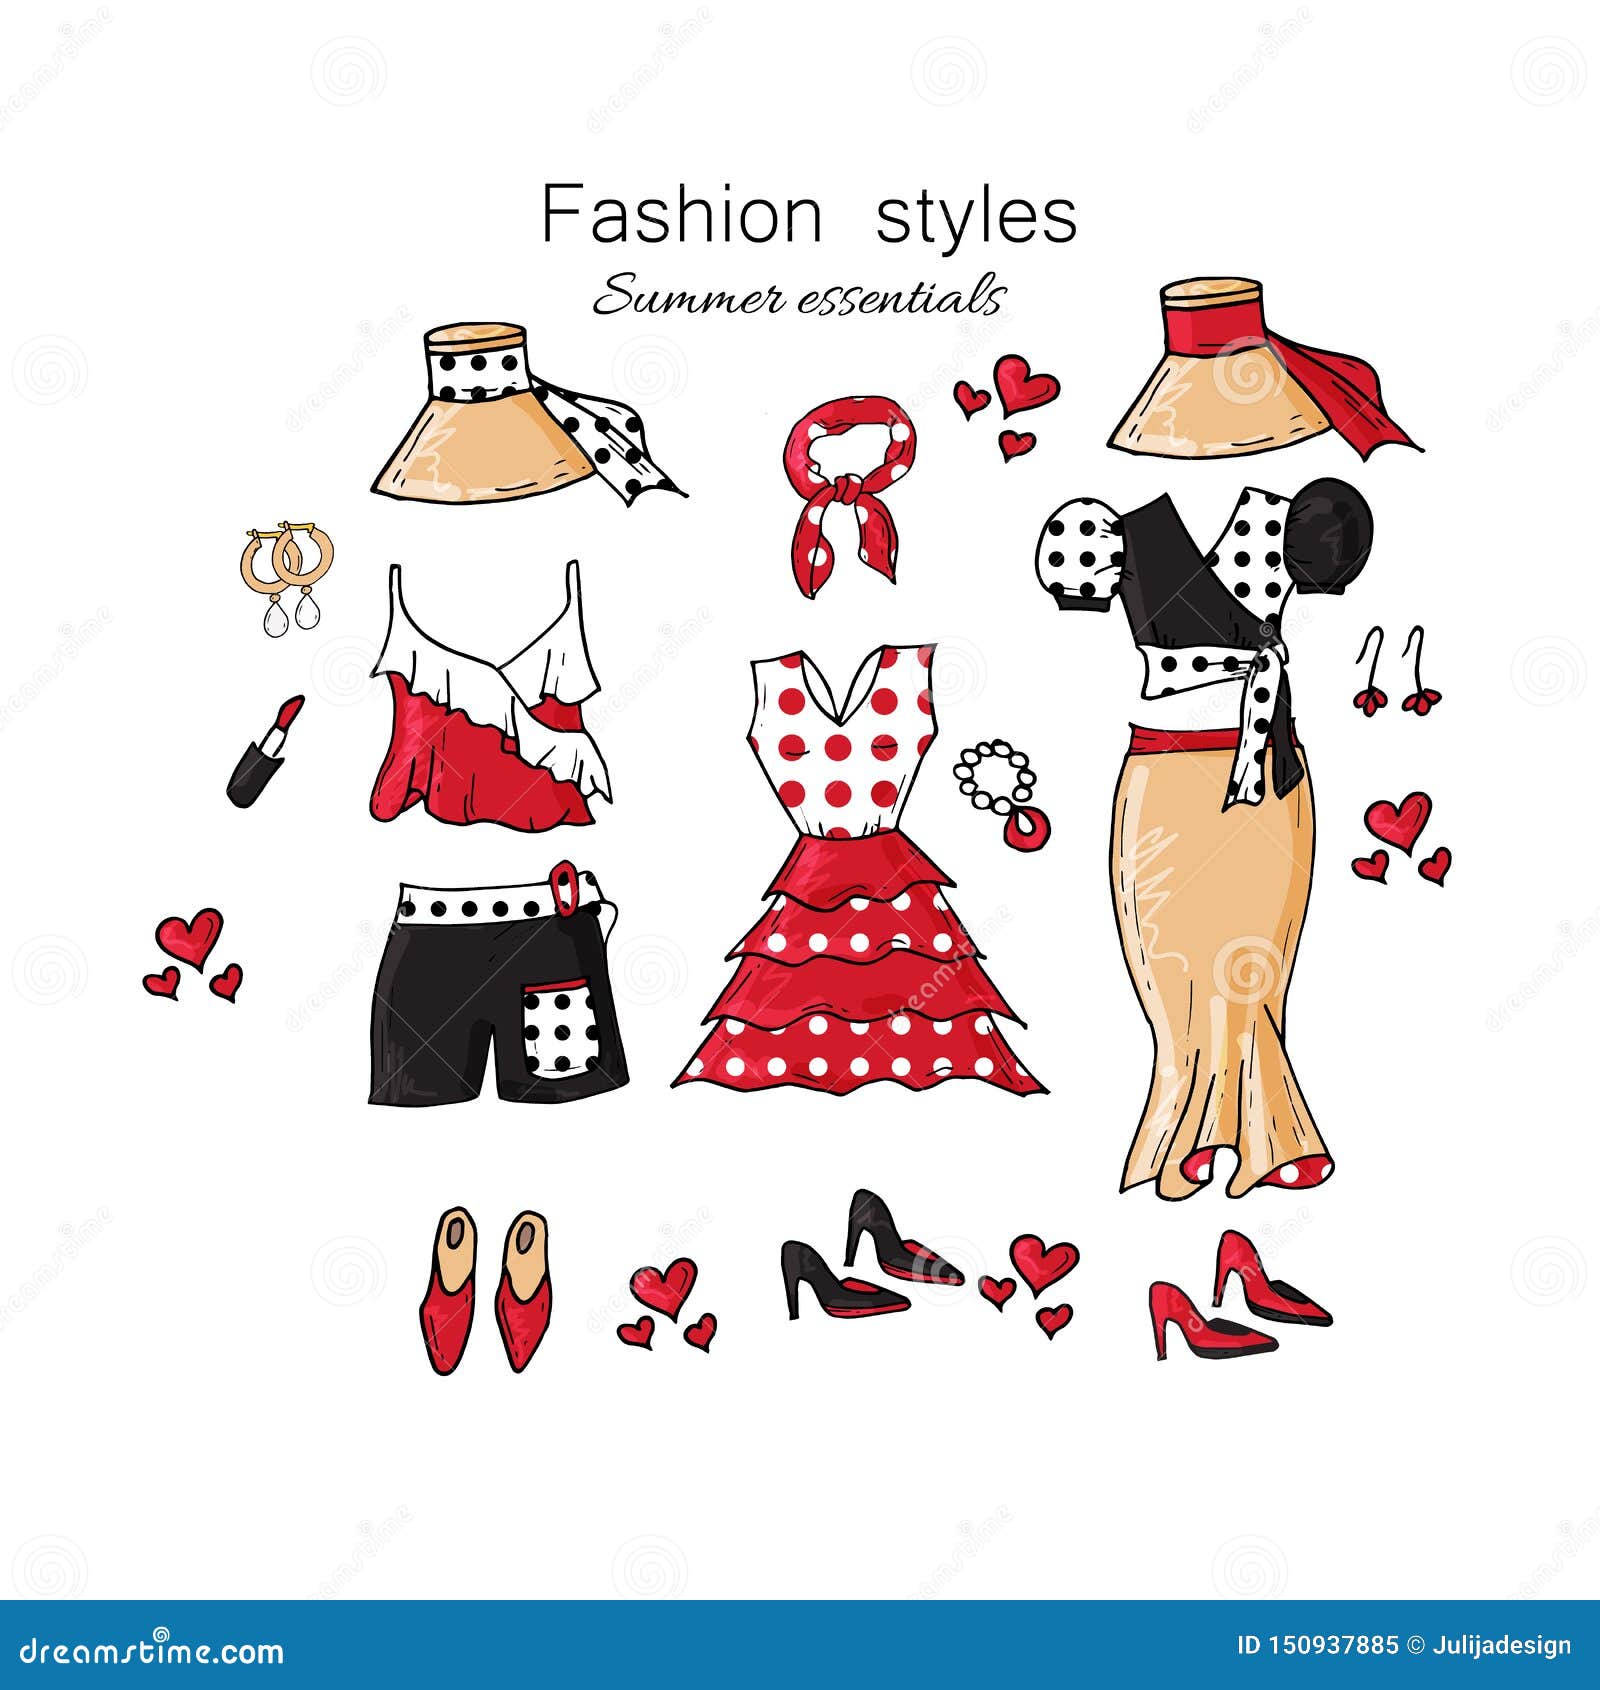 Pin on ideas for outfits